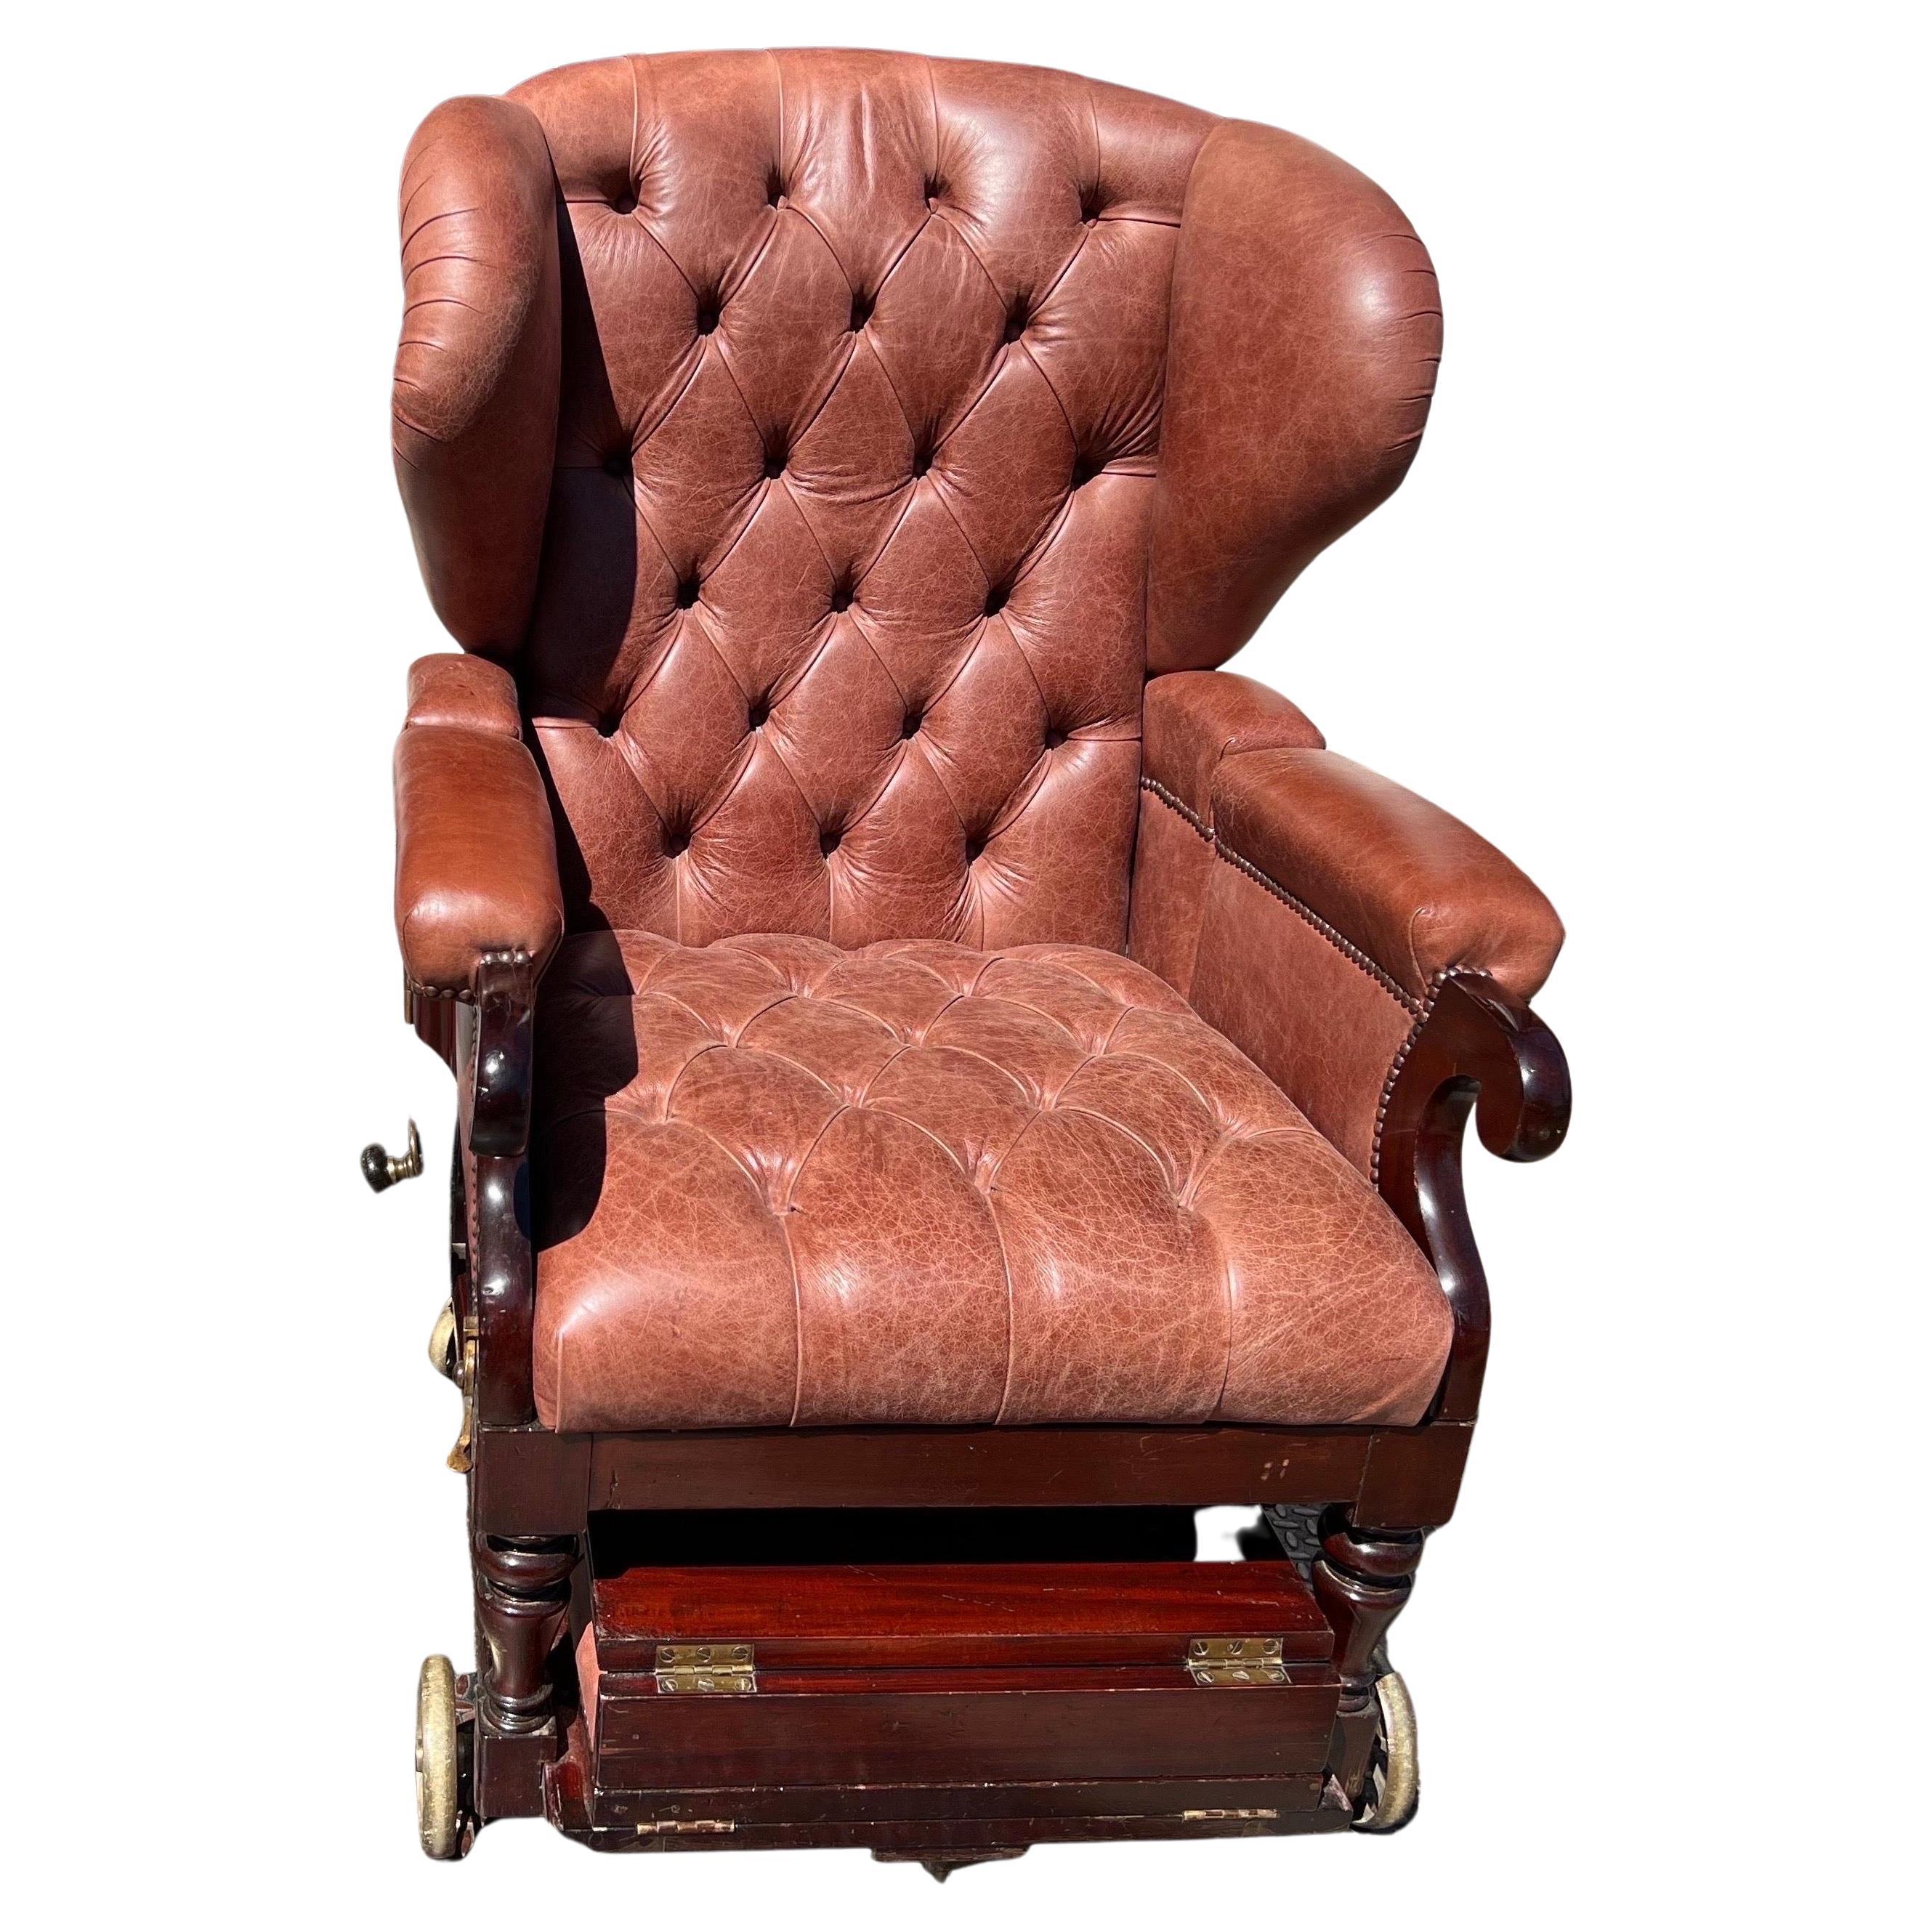 Fantastic piece of labeled 19th century London made metamorphic furniture in recently tufted leather by J. Ward, “manufacturer to the Queen and royal family”.

The chair reclines (from 34” to 62” with ottoman slid in place) with leather wrapped